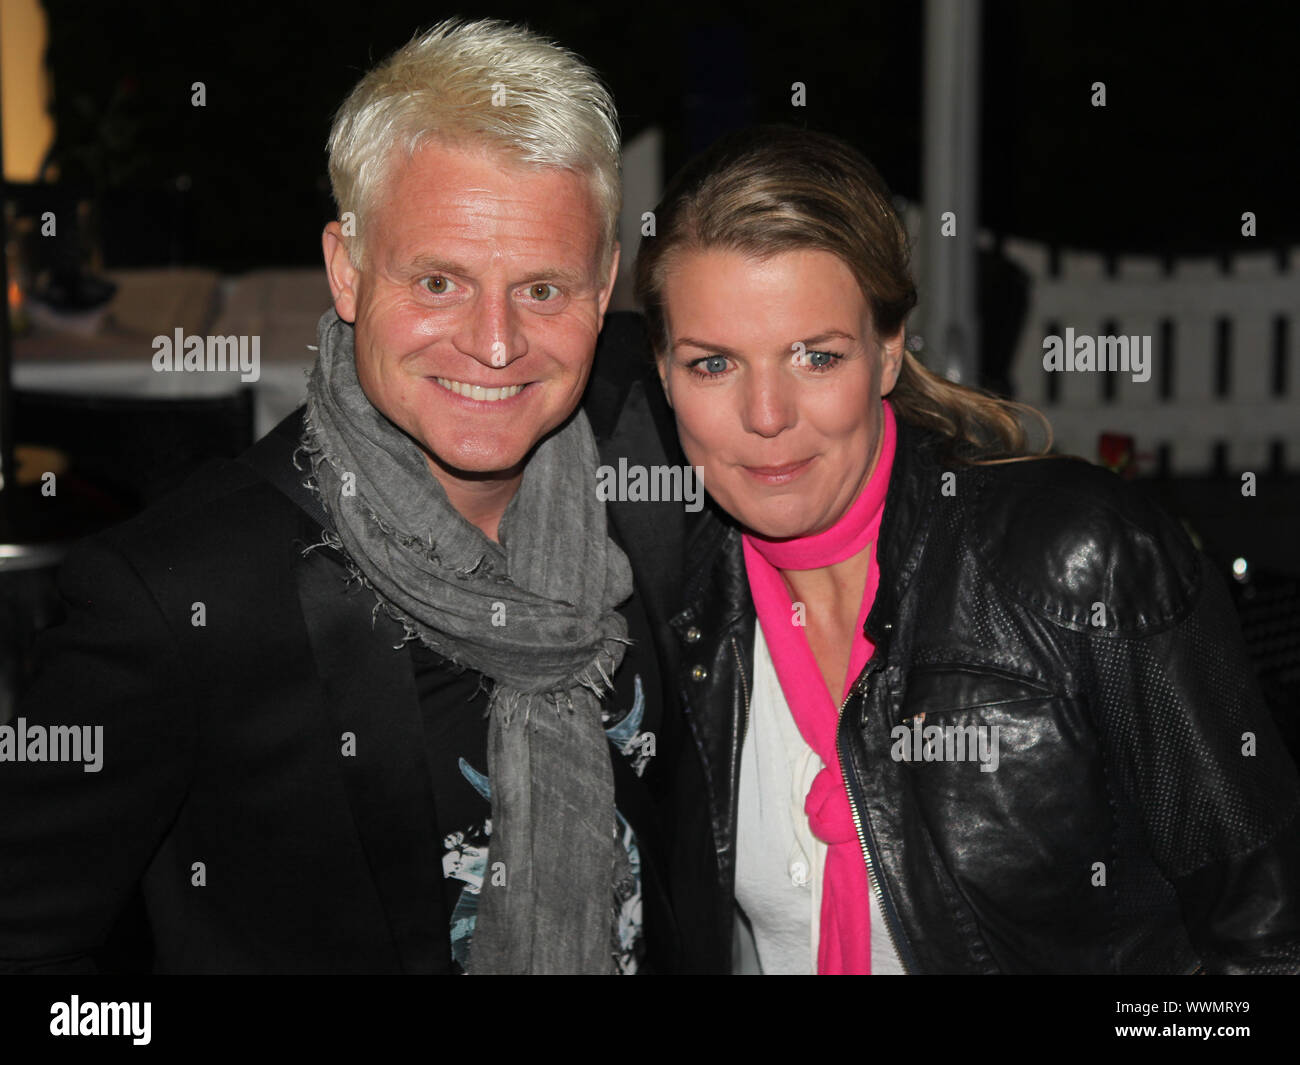 Guido Cantz and Mirja Boes Stock Photo